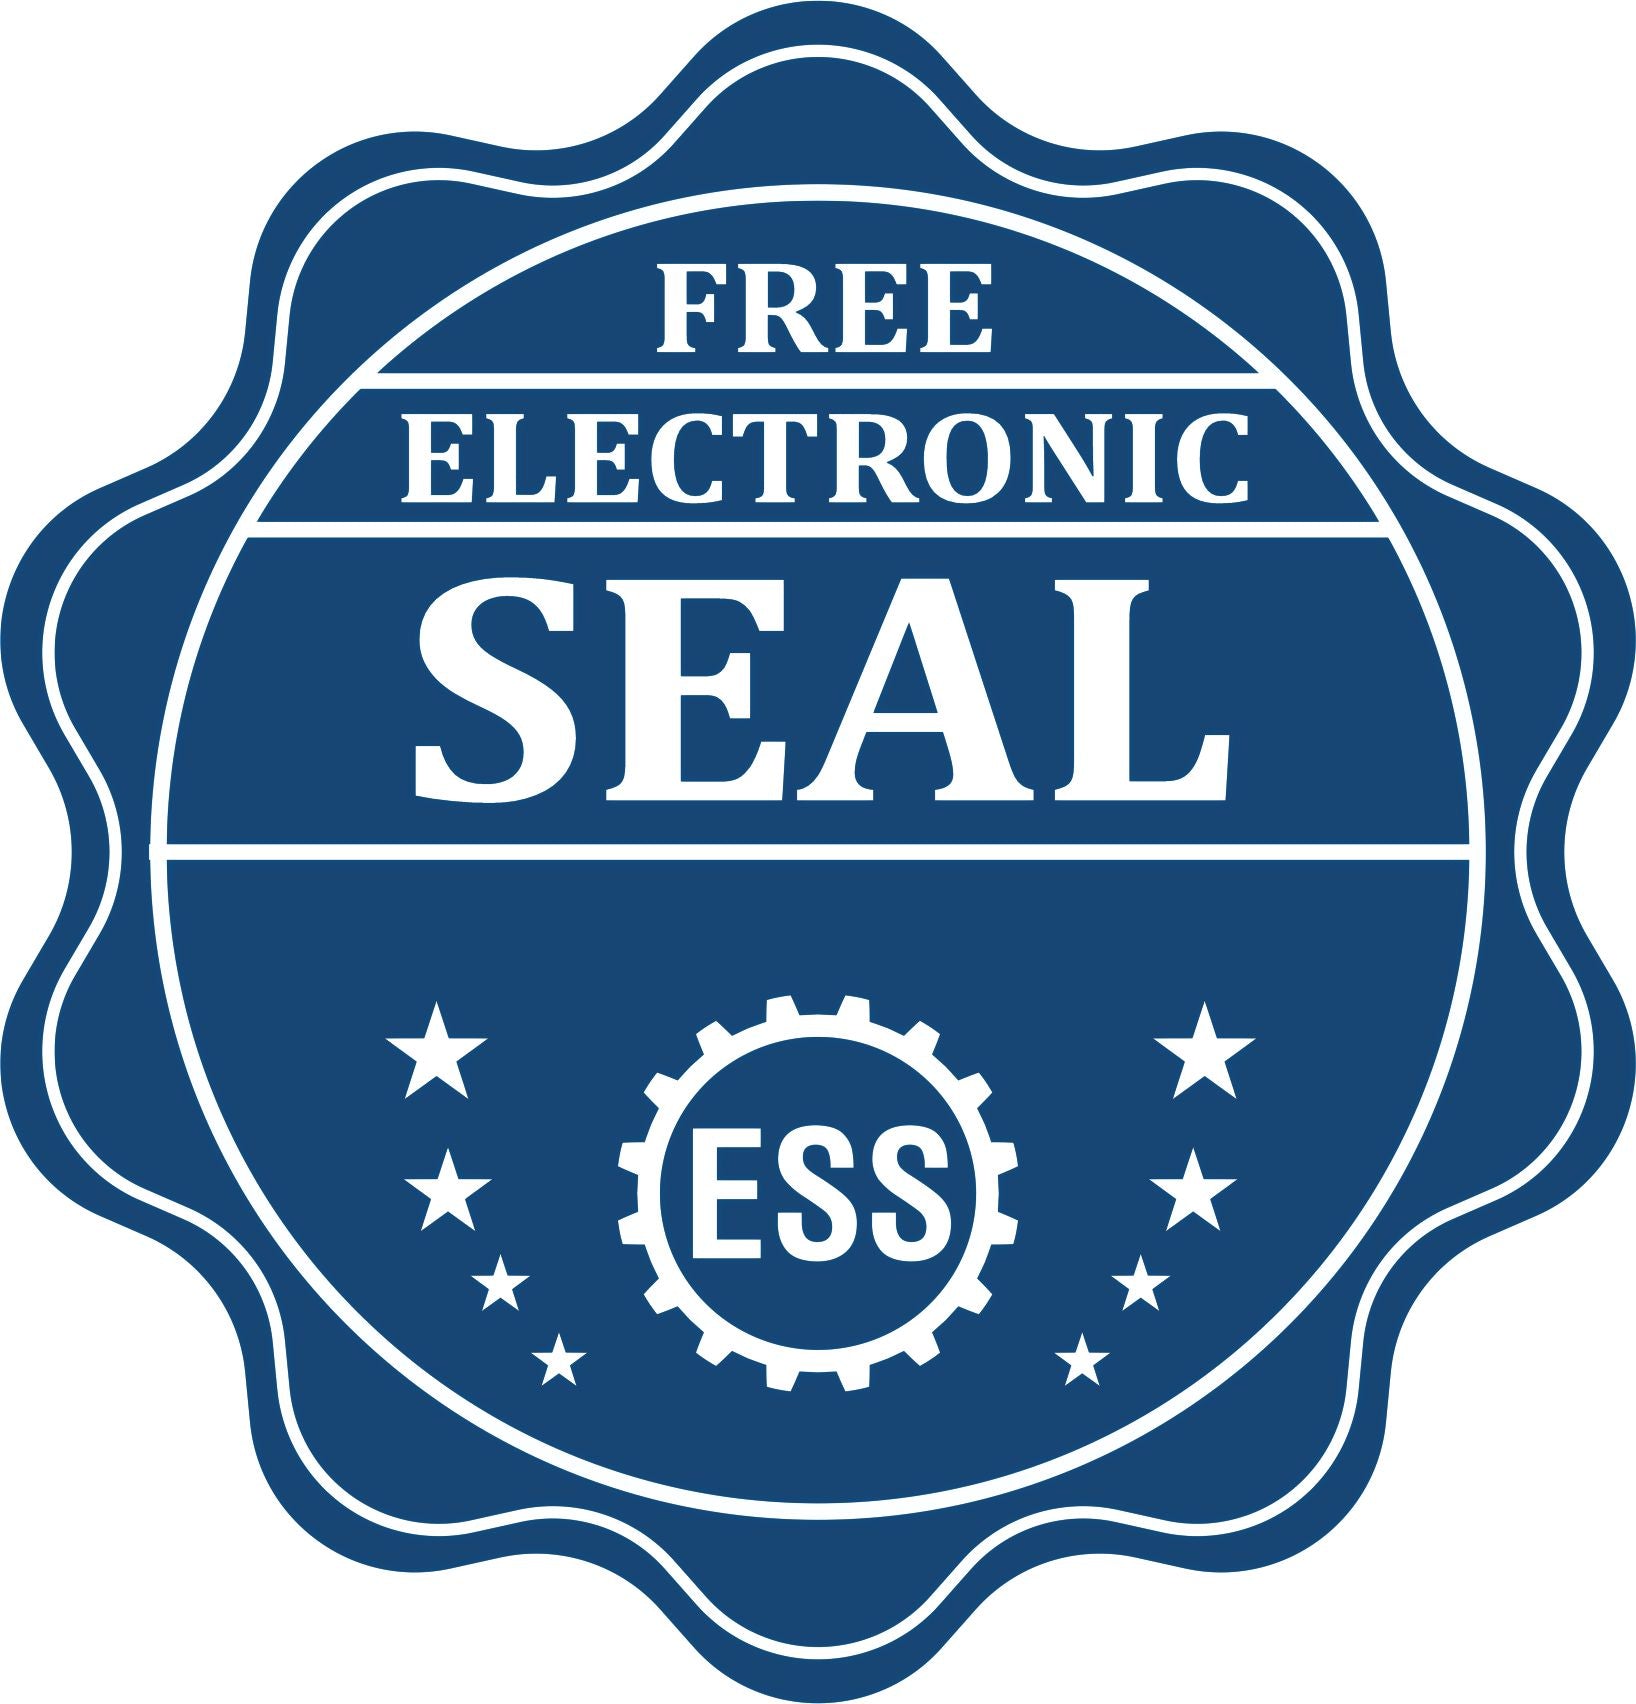 A badge showing a free electronic seal for the Handheld Georgia Professional Geologist Embosser with stars and the ESS gear on the emblem.